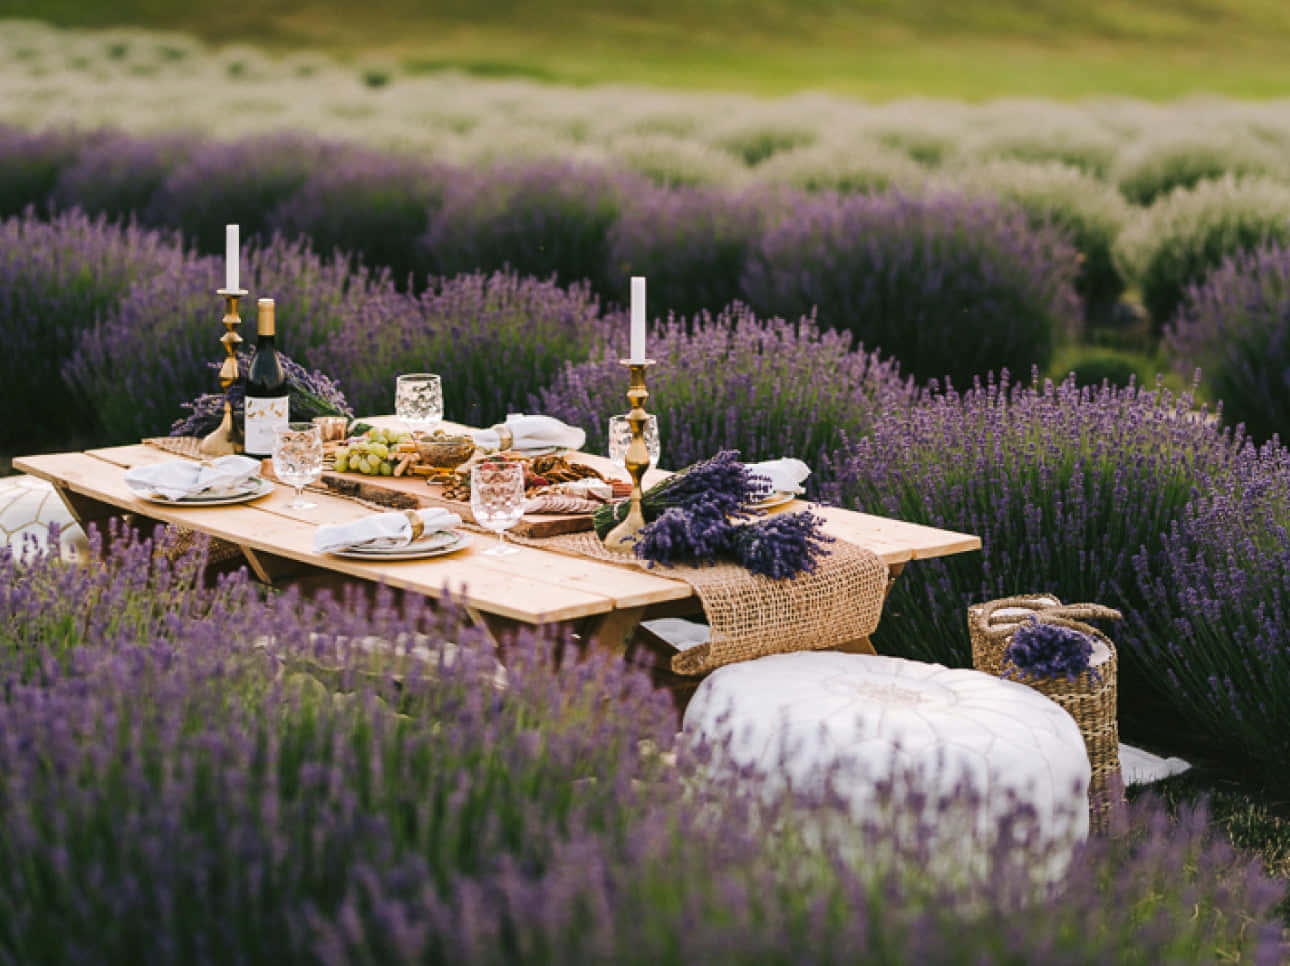 Let your stress melt away into a calming lavender-filled day